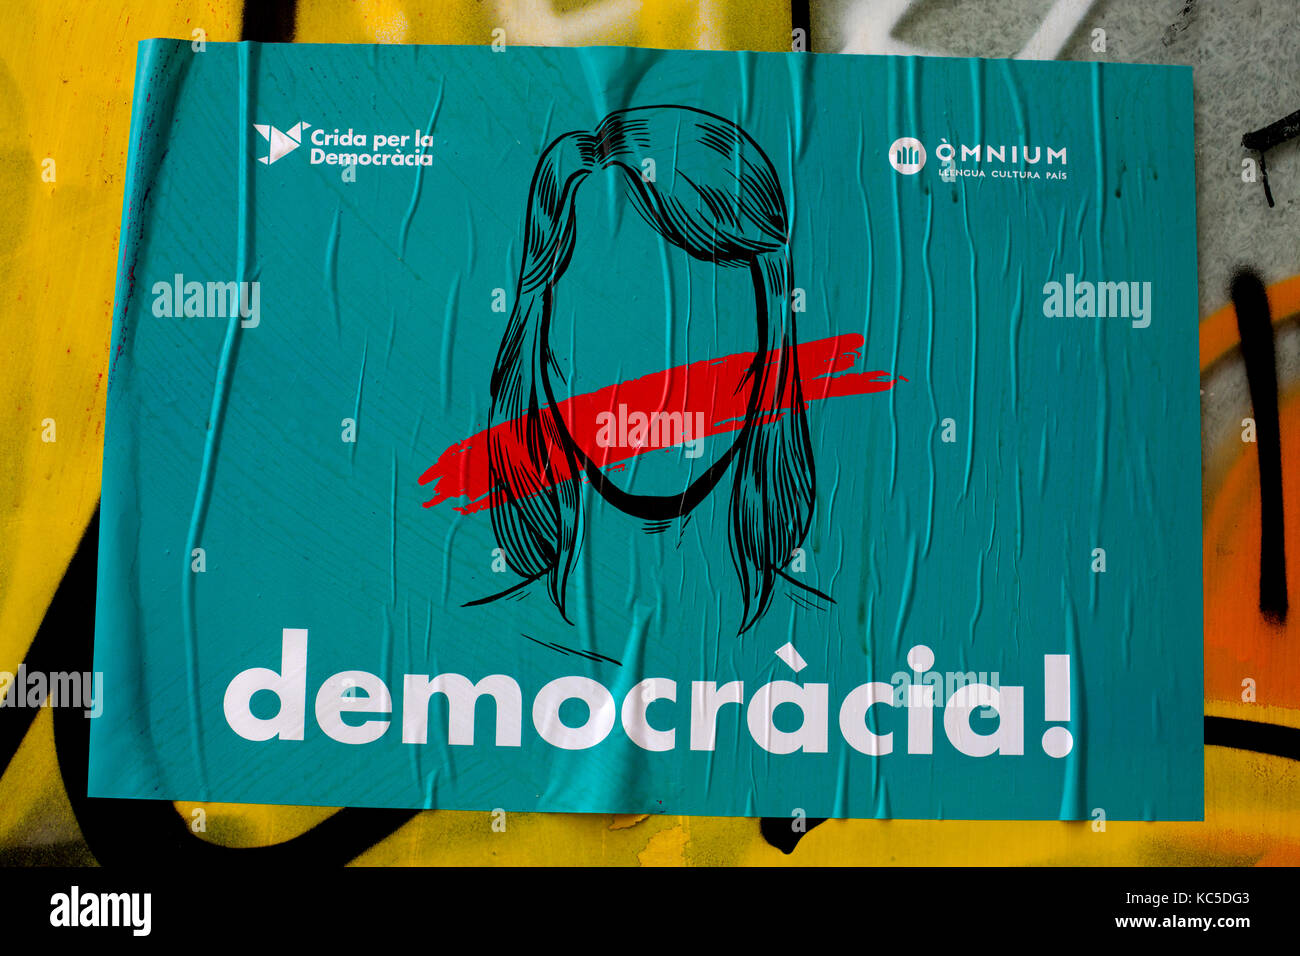 Catalan independence poster calling for democracy and the right to vote for independence. Stock Photo